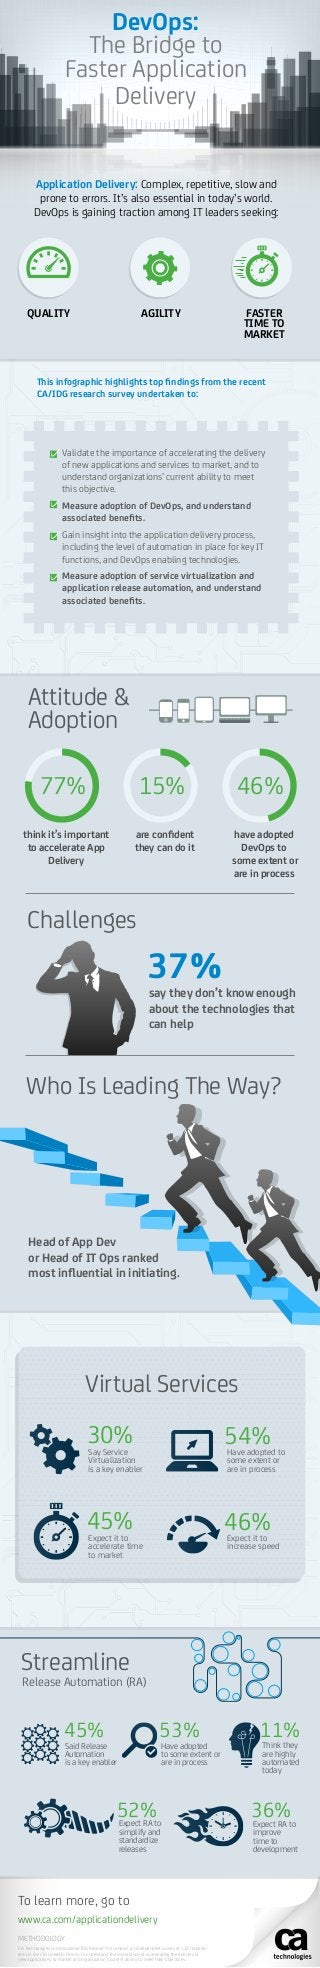 This infographic highlights top ﬁndings from the recent
CA/IDG research survey undertaken to:
Attitude &
Adoption
think it’s important
to accelerate App
Delivery
are conﬁdent
they can do it
have adopted
DevOps to
some extent or
are in process
Virtualize
Who Is Leading The Way?
Head of App Dev
or Head of IT Ops ranked
most inﬂuential in initiating.
DevOps:
The Bridge to
Faster Application
Delivery
Application Delivery: Complex, repetitive, slow and
prone to errors. It’s also essential in today’s world.
DevOps is gaining traction among IT leaders seeking:
QUALITY AGILITY FASTER
TIME TO
MARKET
Validate the importance of accelerating the delivery
of new applications and services to market, and to
understand organizations’ current ability to meet
this objective.
Measure adoption of DevOps, and understand
associated beneﬁts.
Gain insight into the application delivery process,
including the level of automation in place for key IT
functions, and DevOps enabling technologies.
Measure adoption of service virtualization and
application release automation, and understand
associated beneﬁts.
37%
say they don’t know enough
about the technologies that
can help
77% 15% 46%
Challenges
Streamline
Release Automation (RA)
45% 53% 11%
52% 36%
Said Release
Automation
is a key enabler
Have adopted
to some extent or
are in process
Think they
are highly
automated
today
Expect RA to
simplify and
standardize
releases
Expect RA to
improve
time to
development
30% 54%
Virtual Services
Say Service
Virtualization
is a key enabler
Have adopted to
some extent or
are in process
45% 46%Expect it to
accelerate time
to market
Expect it to
increase speed
To learn more, go to
METHODOLOGY
CA Technologies commissioned IDG Research to conduct an independent survey of 110 respond-
ents in the CIO LinkedIn Forum, to understand the importance of accelerating the delivery of
new applications to market and organization’s current ability to meet their objectives.
www.ca.com/applicationdelivery
 